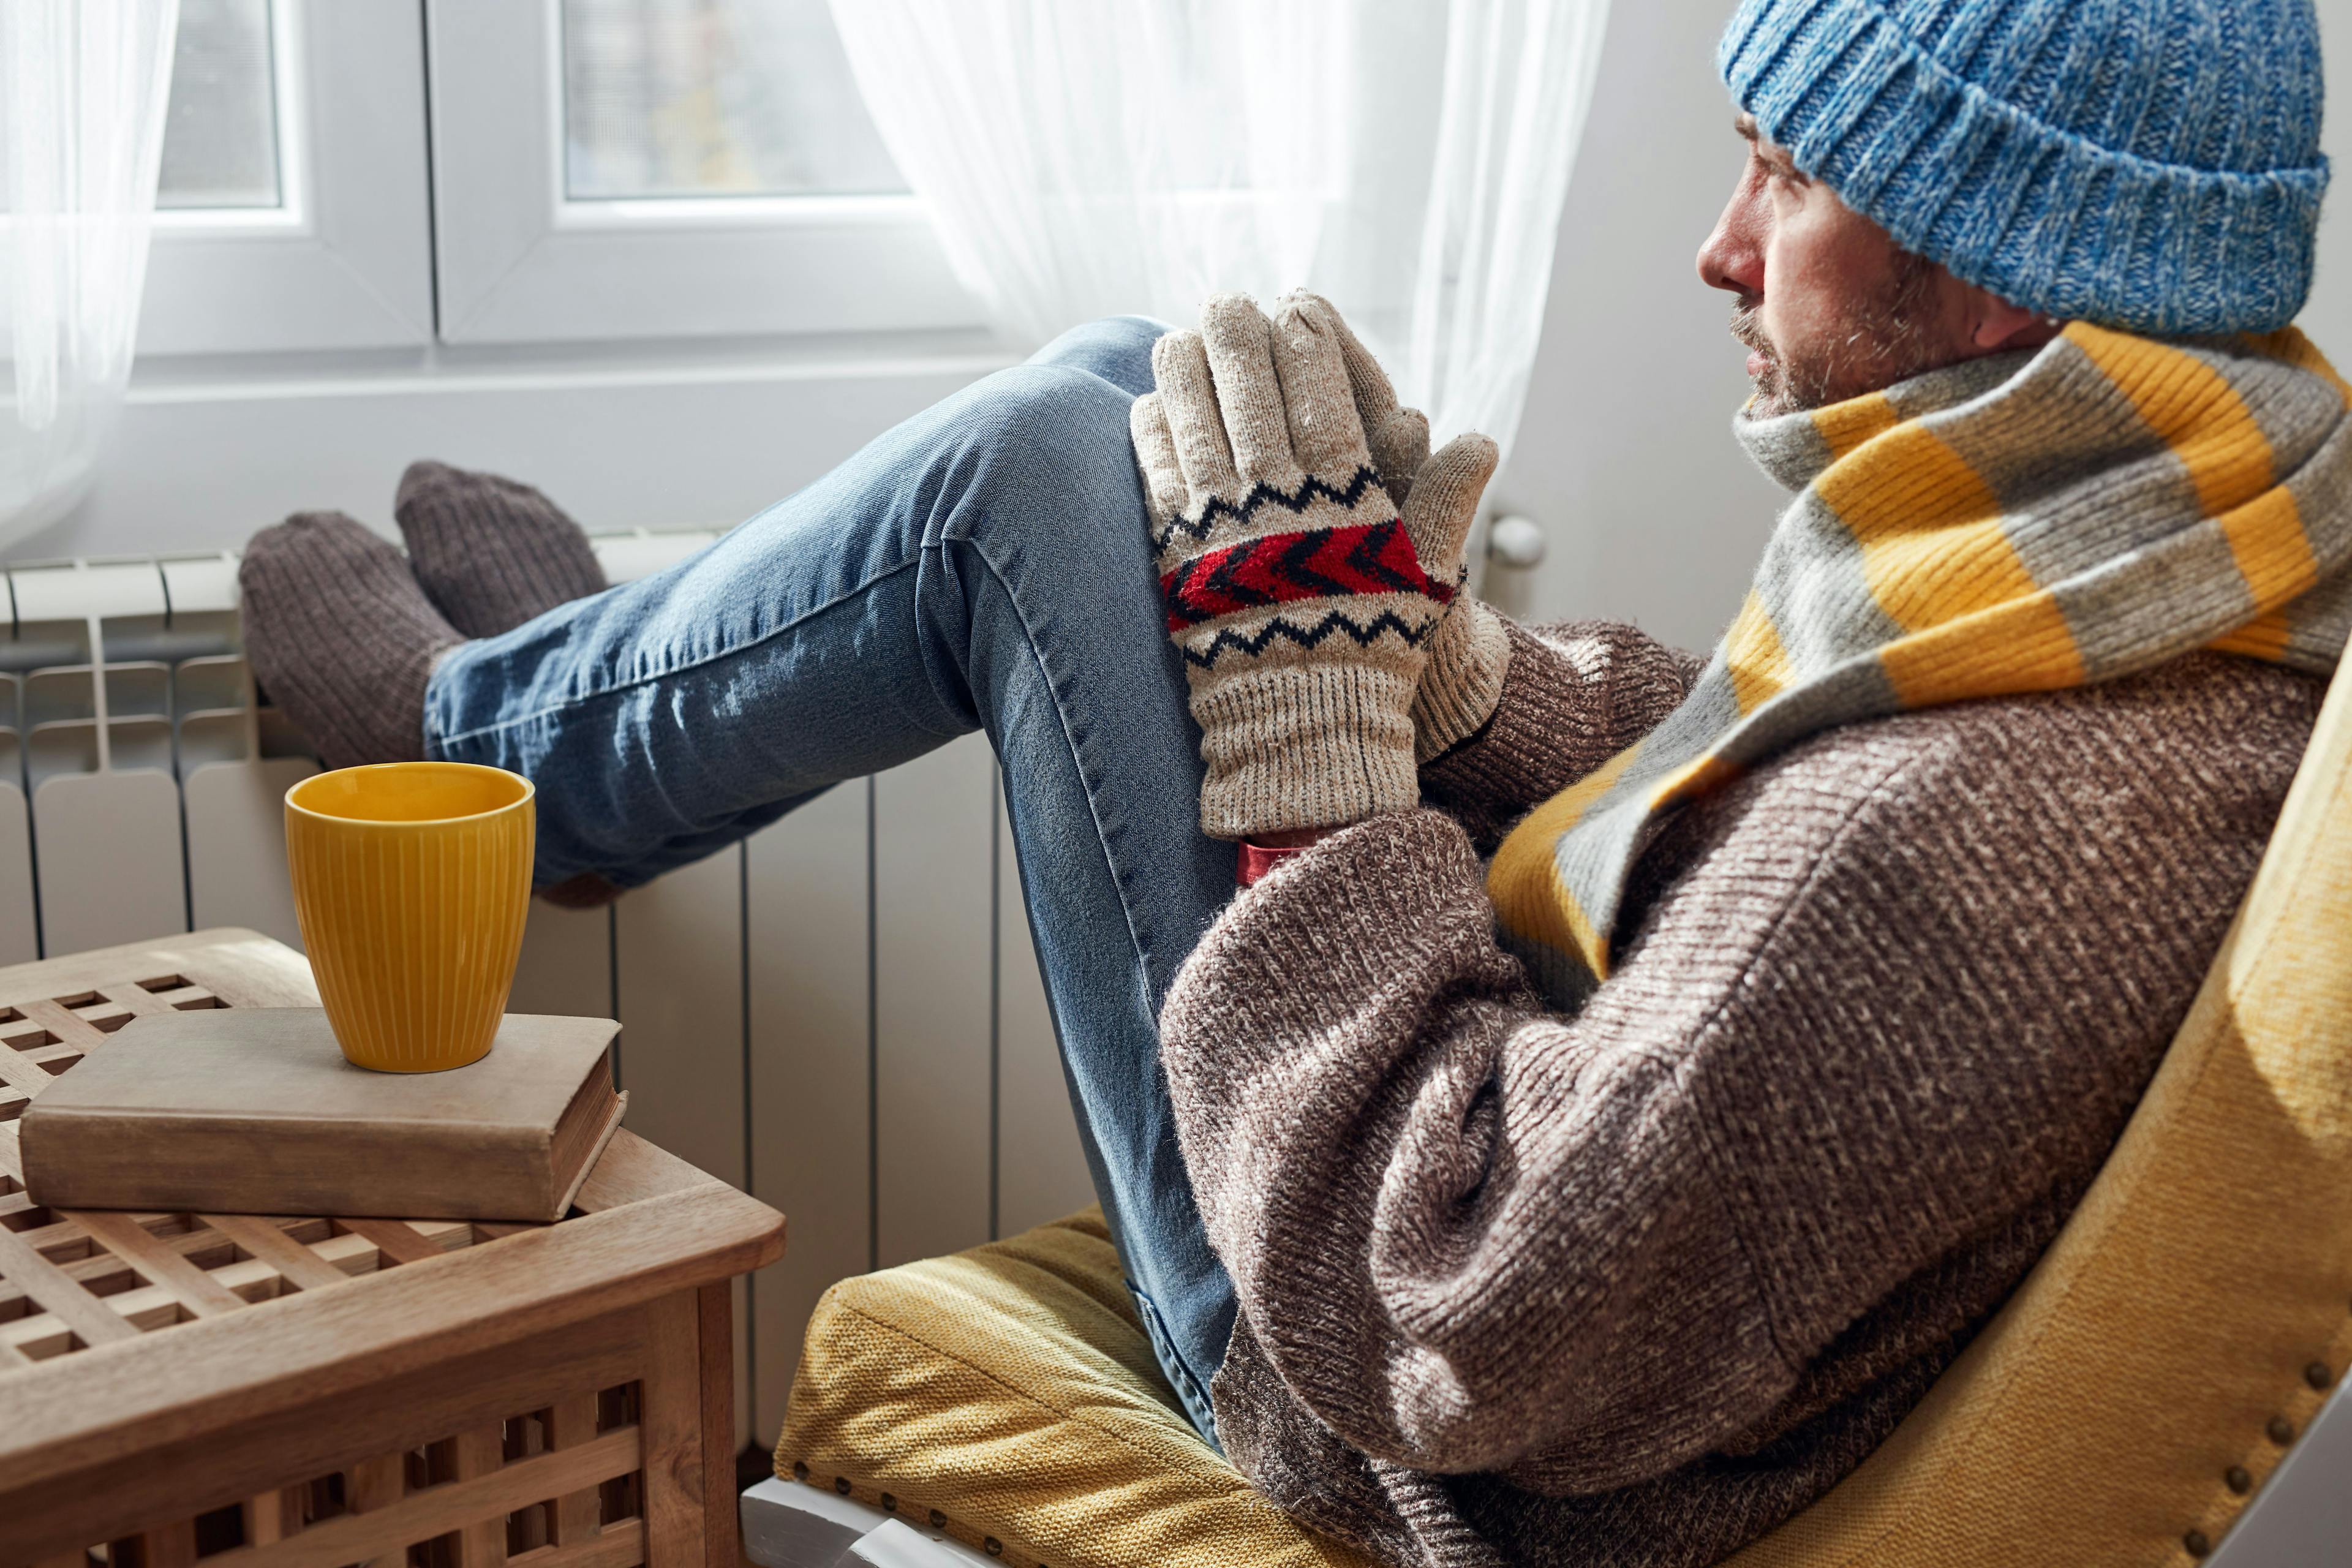 Person sitting by radiator with warm clothes on